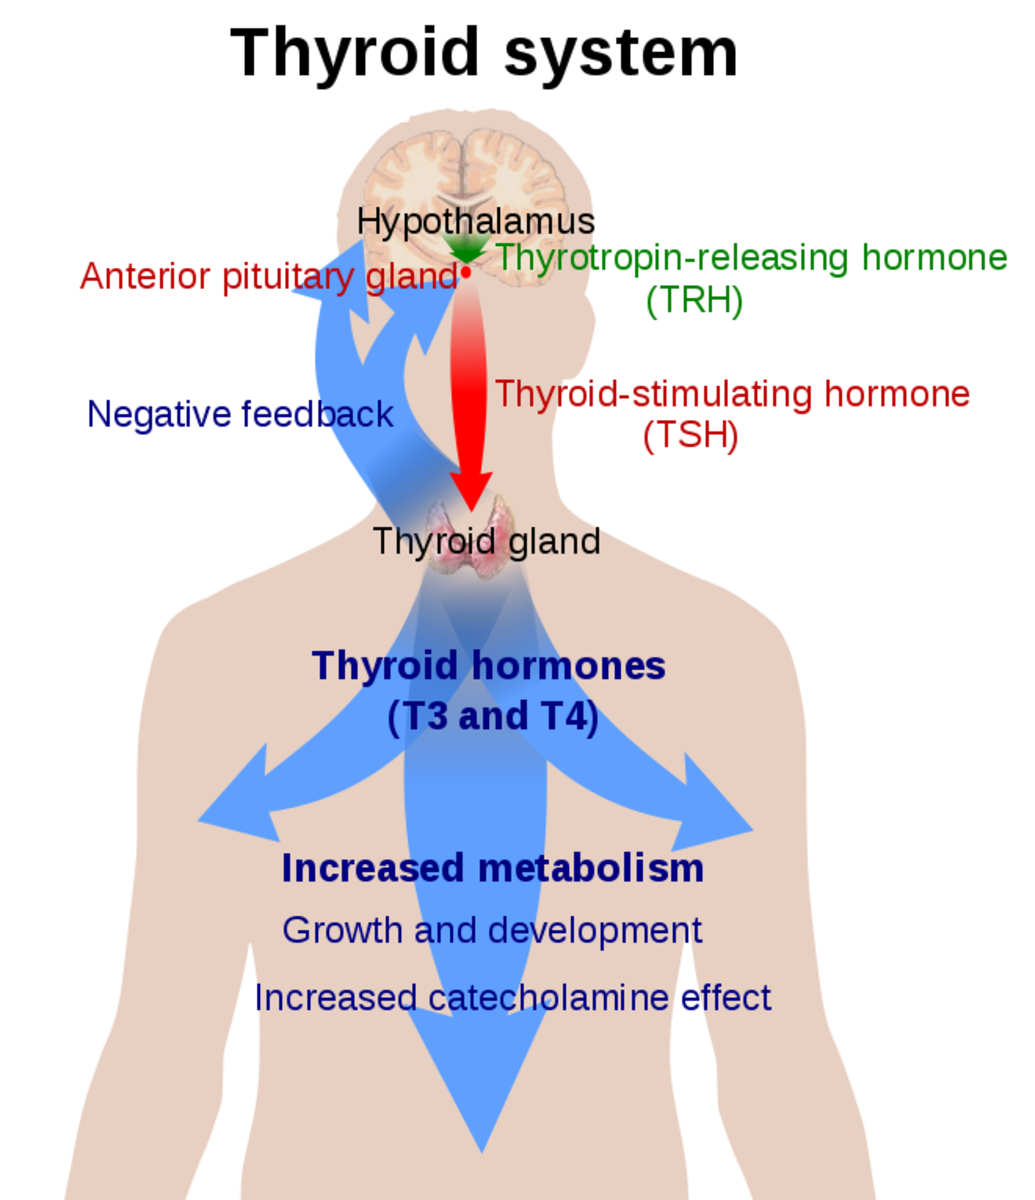 The thyroid system